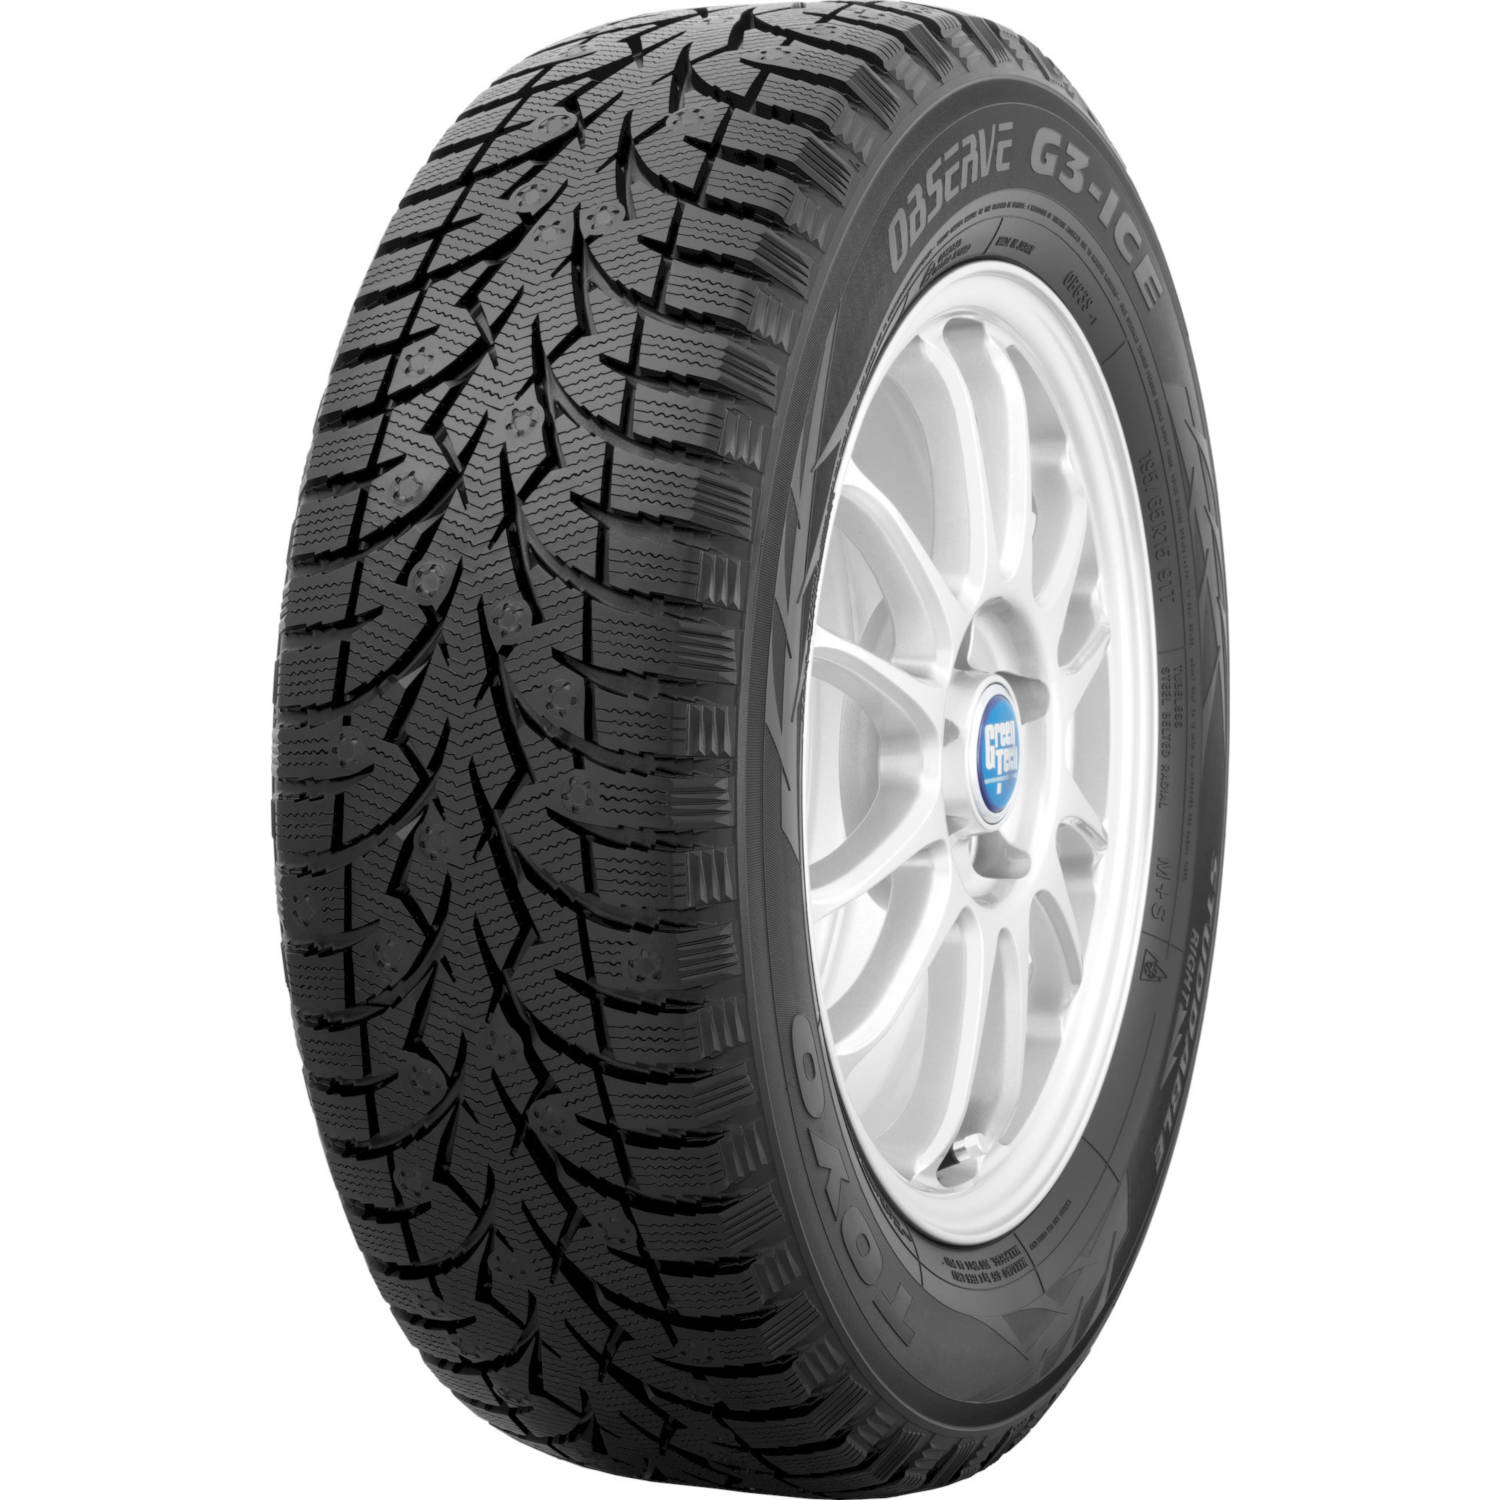 TOYO TIRES OBSERVE G3 ICE 205/55R16 (24.9X8.1R 16) Tires